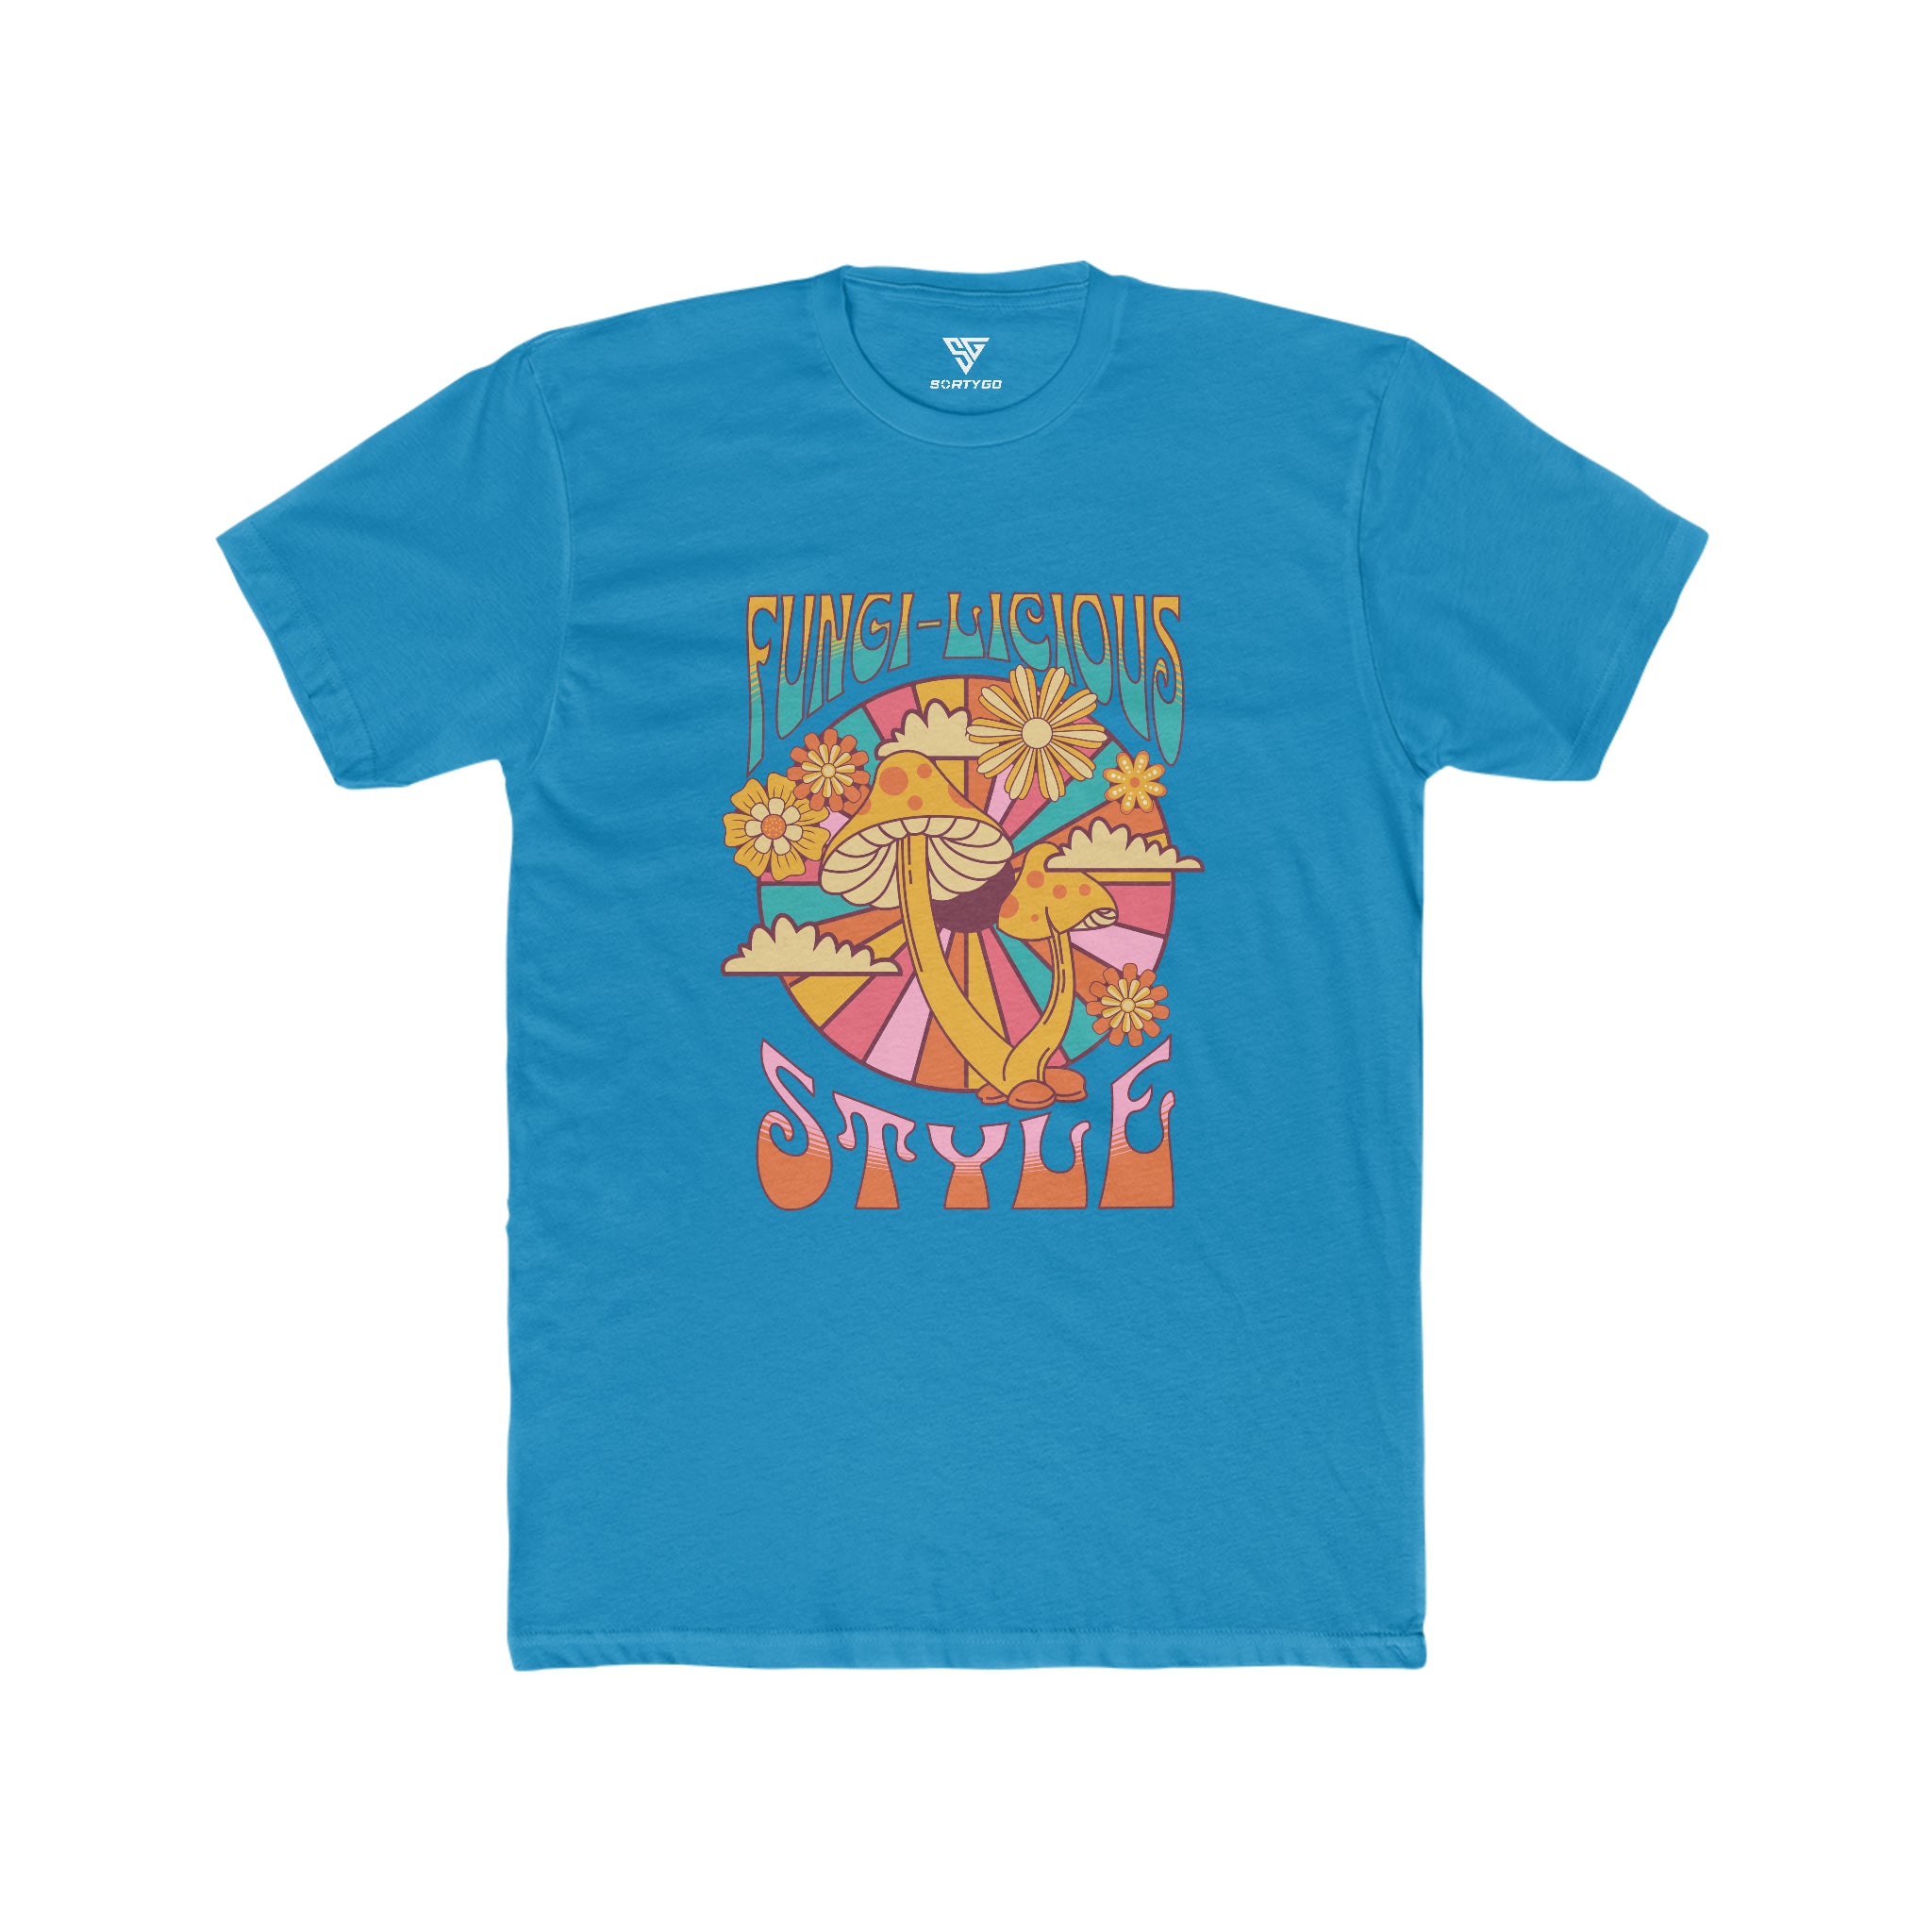 SORTYGO - Fungi-licious Style Men Fitted T-Shirt in Solid Turquoise